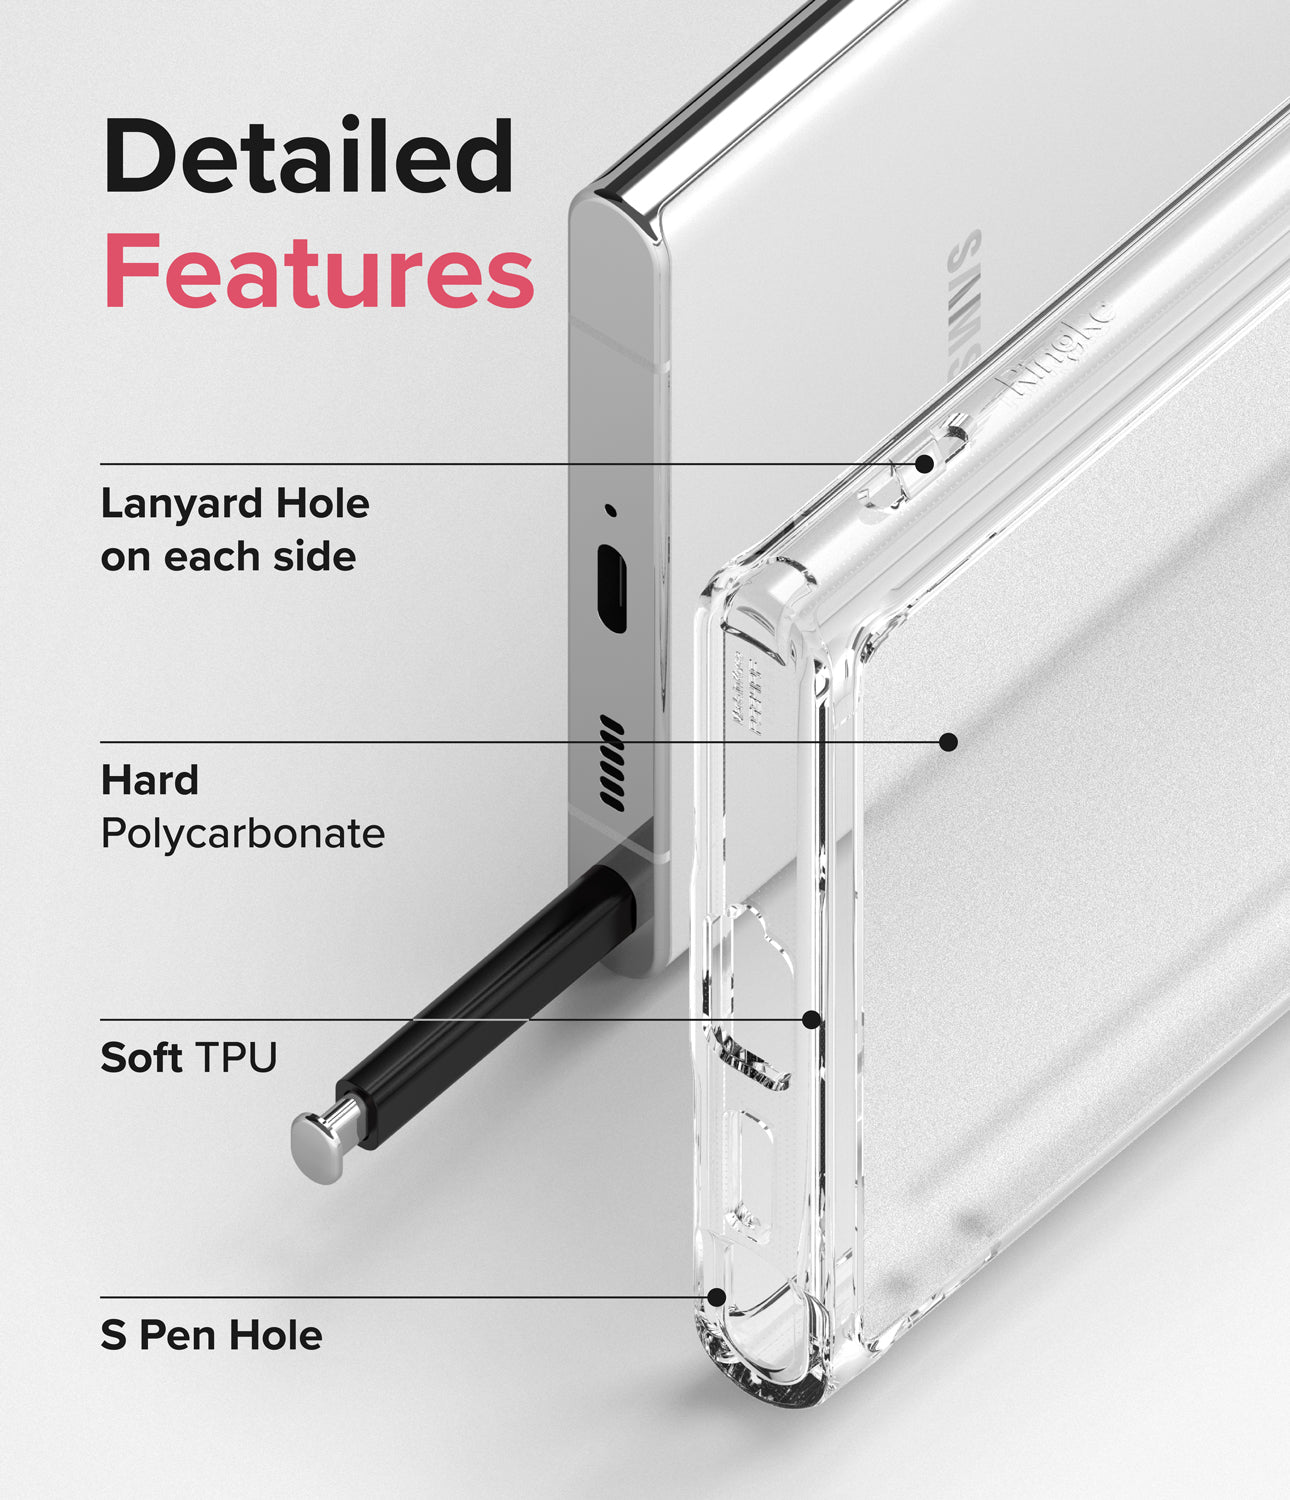 Galaxy S22 Ultra Case | Fusion - Ringke Official StoreGalaxy S22 Ultra Case | Fusion - Matte Clear  - Detailed Features. Lanyard Hole on each side. Hard Polycarbonate. Soft TPU. S Pen Hole.